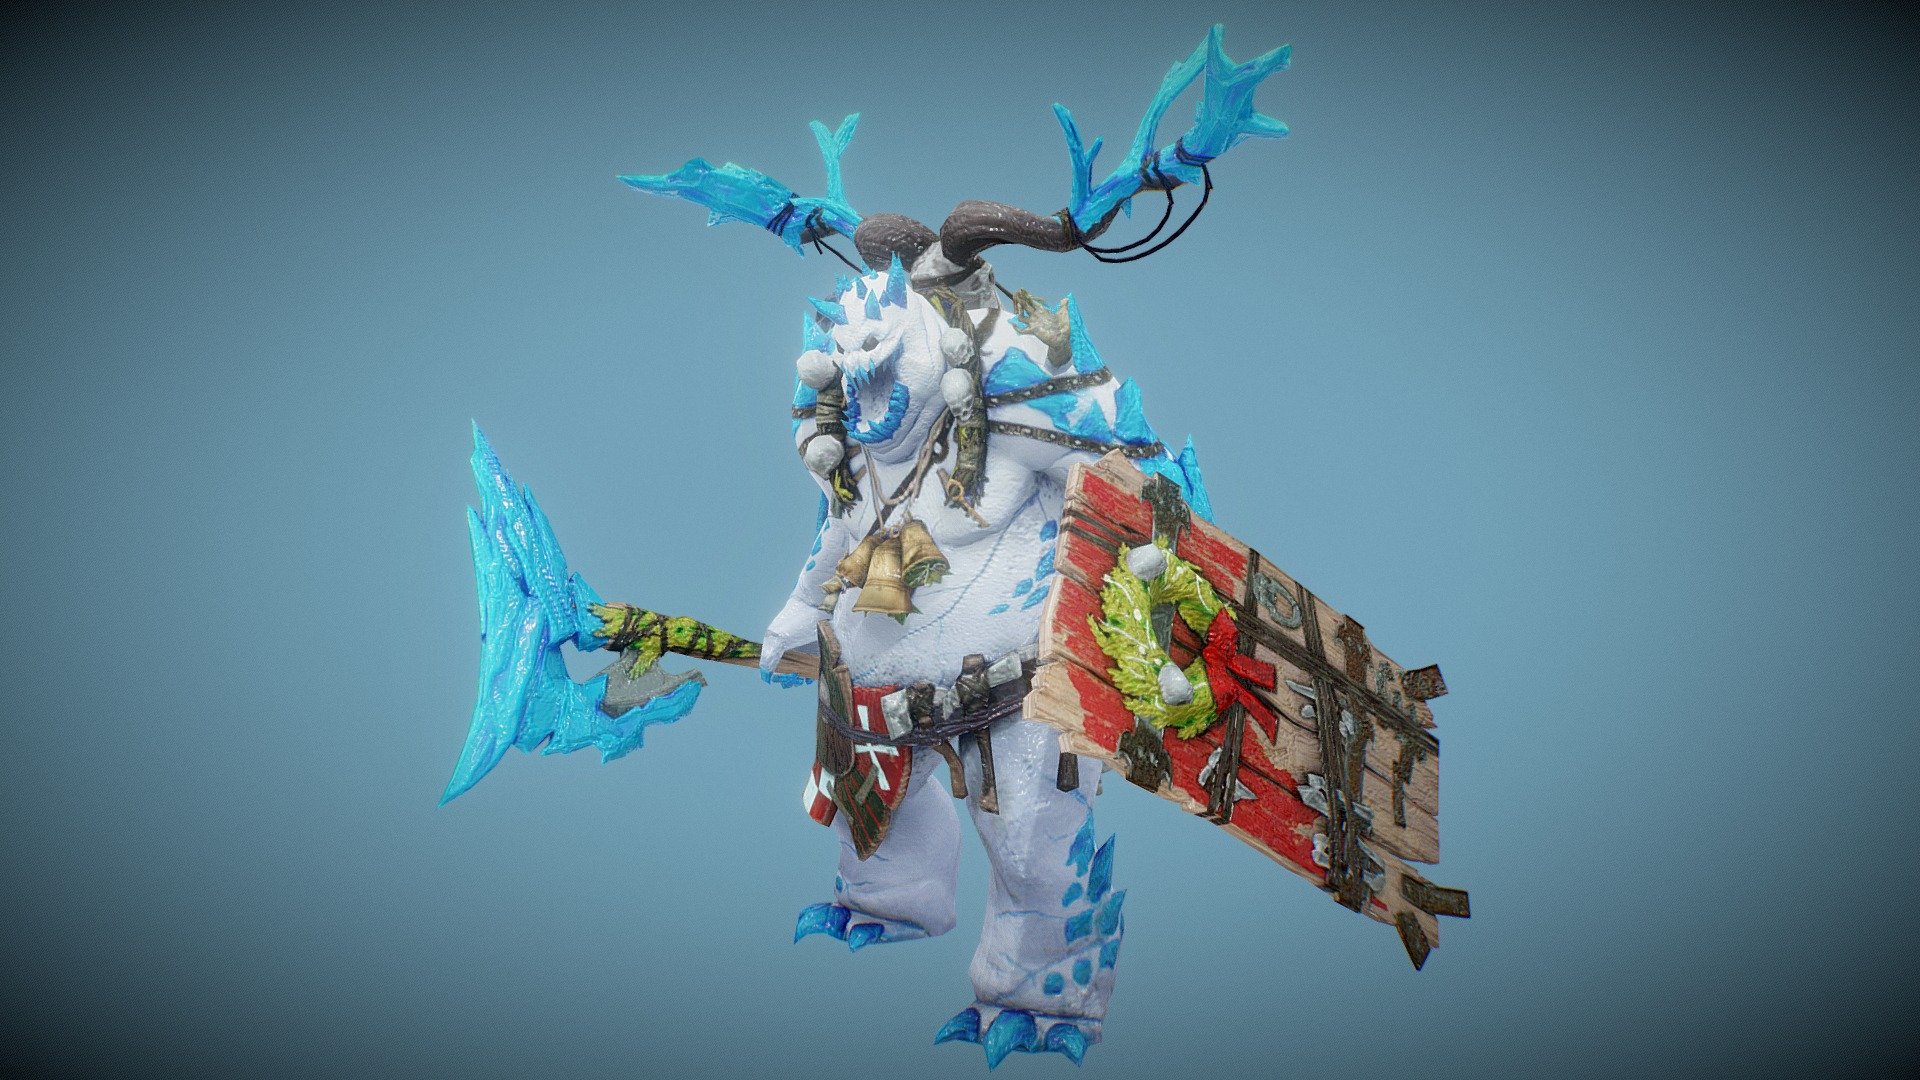 Lowpoly annimated model of Monster yeti s a towering yeti clad in frost-encrusted armor, wielding a massive axe forged from ancient ice. With each swing, it brings down the chilling wrath of the frozen tundra. Include nude meshes This character would work well as an NPC, a rank-and-file enemy, or a boss for a fantasy game. This character is of different proportions than the standard Epic Skeleton. The visualization of this character was done in Blender, Substance Painter. The rendering result in other versions with different settings may vary.

+animations unique animations: Idle, Light attack, Critical attack,Death,scary scream,victory position,rest position.

+Total poly count for each body version (include weapons)

+Rigging use FBX skin. Full body rig and basic facial rig.

Let me know if you have any questions, I’ll be glad to help! - Ice Monster yeti - Buy Royalty Free 3D model by Luna Studio (@StudioLuna) 3d model